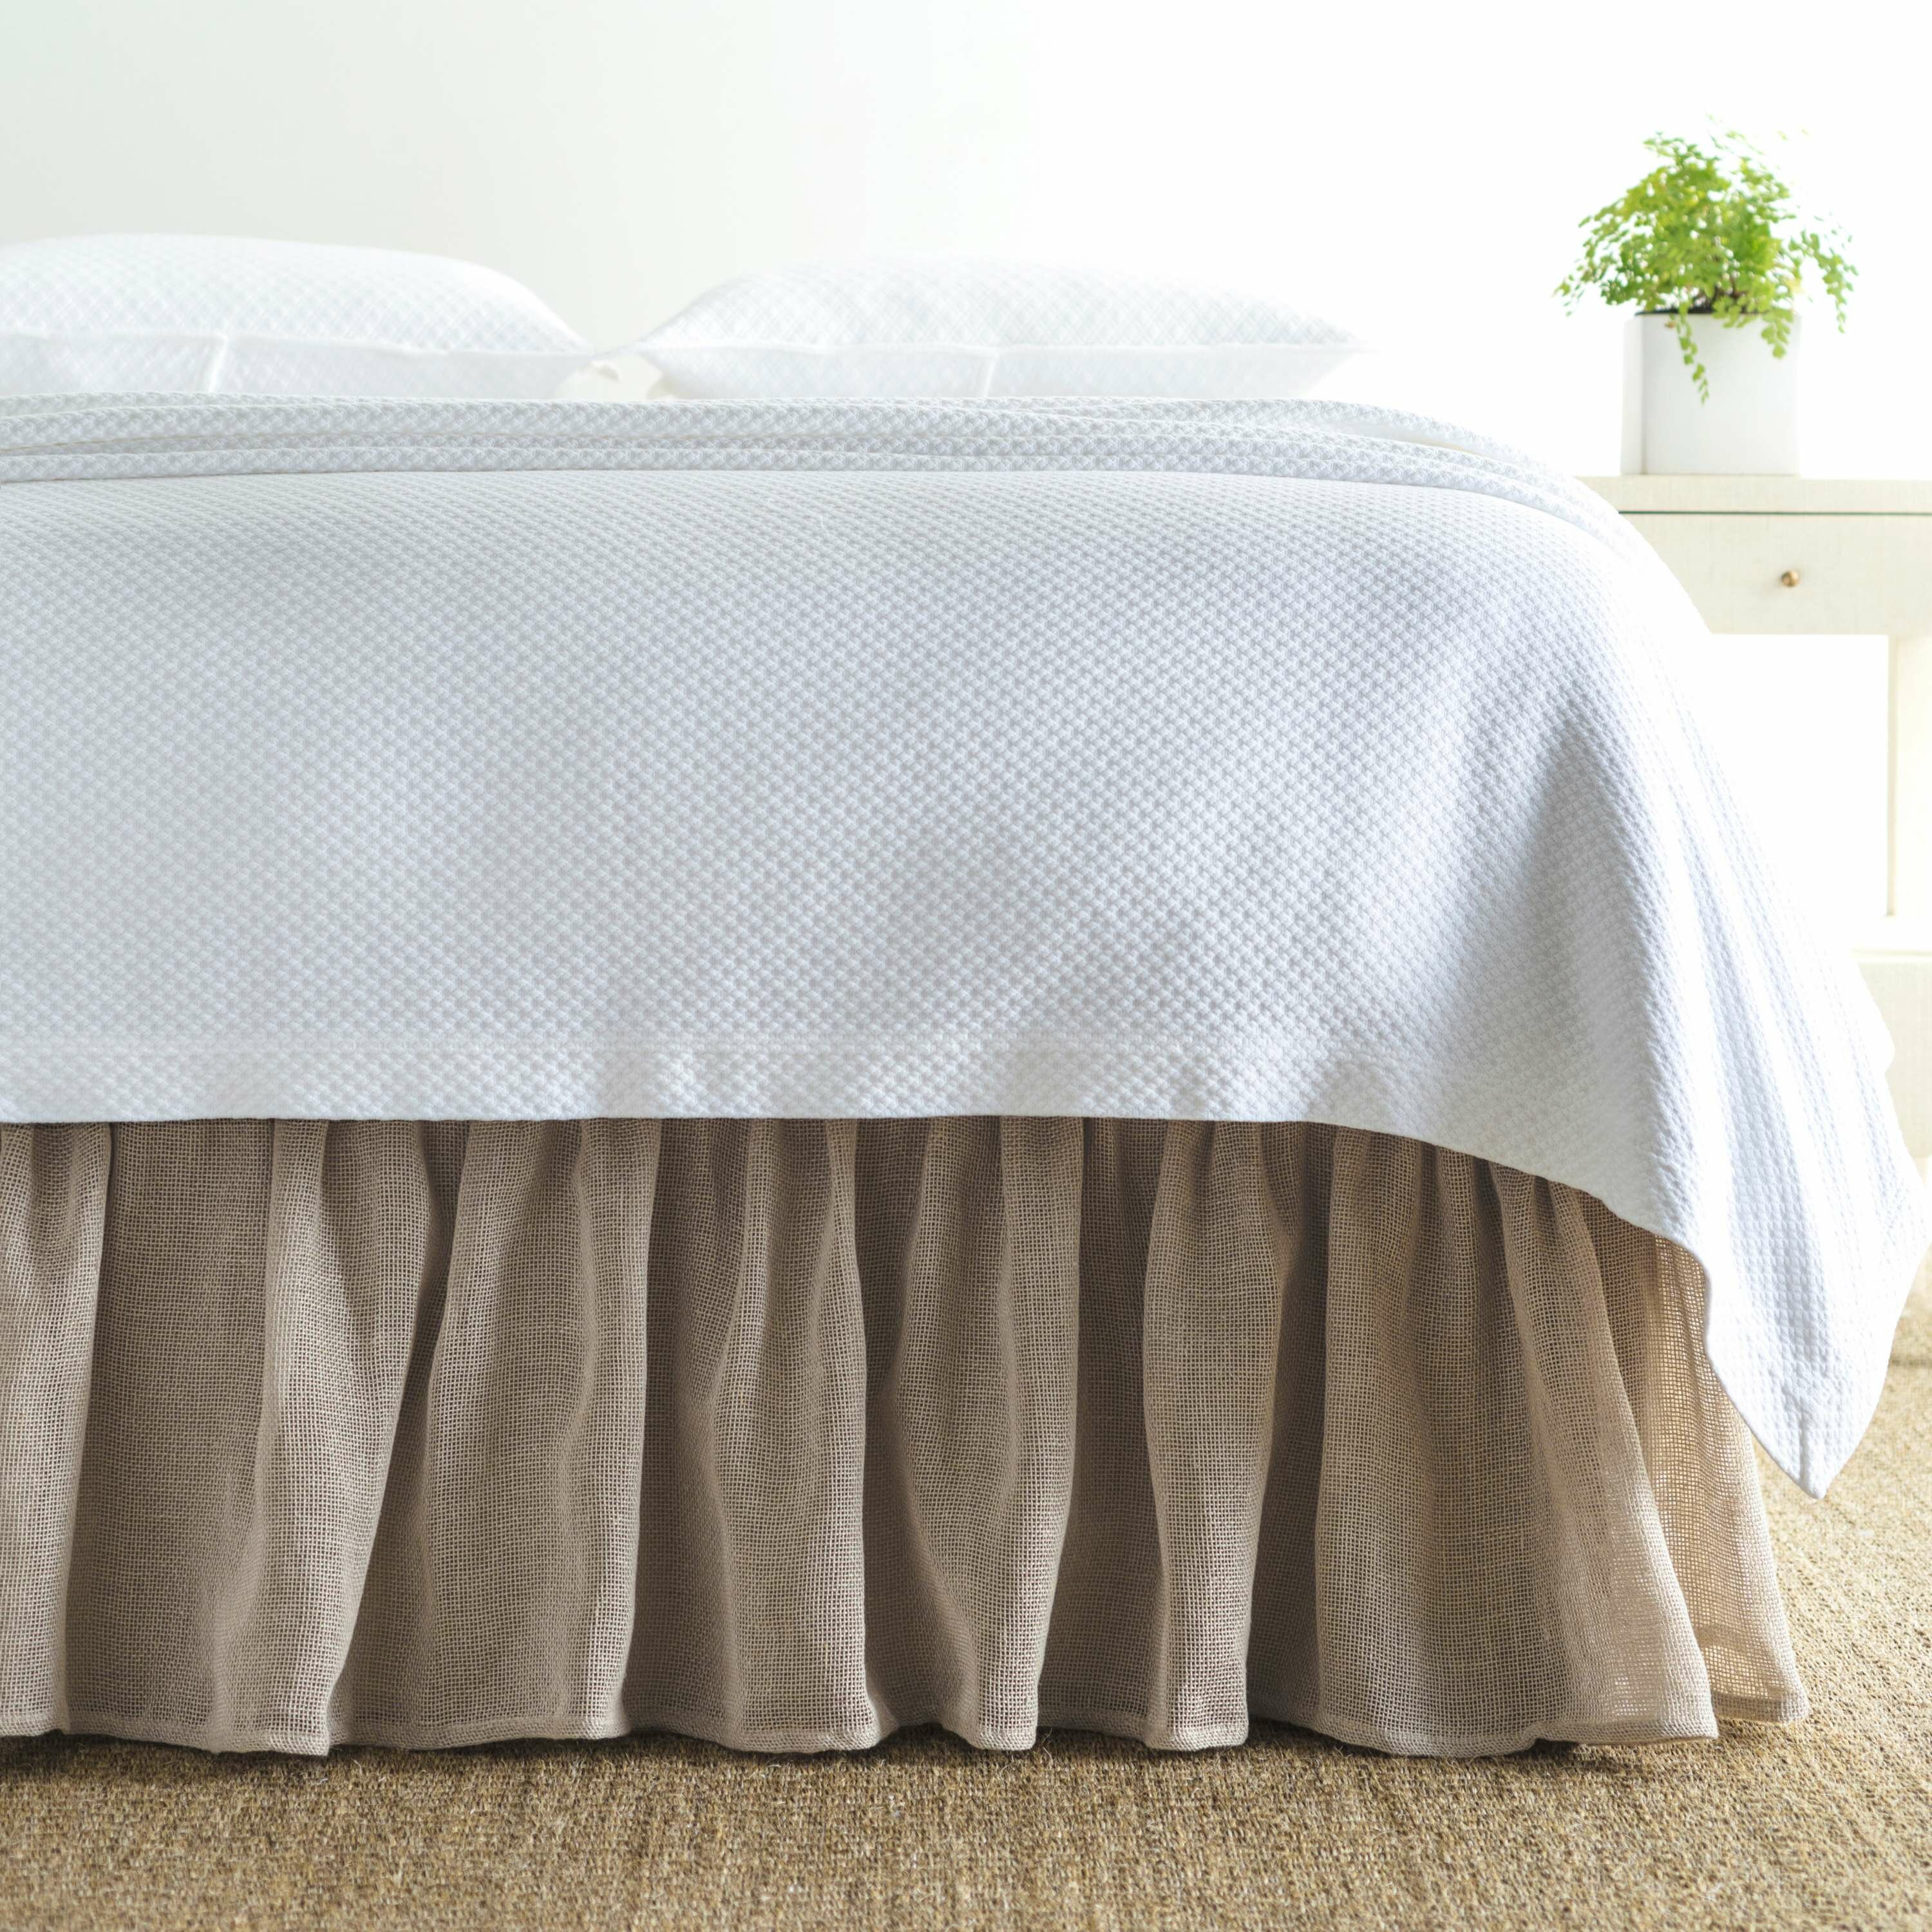 18 bed skirts with split corners